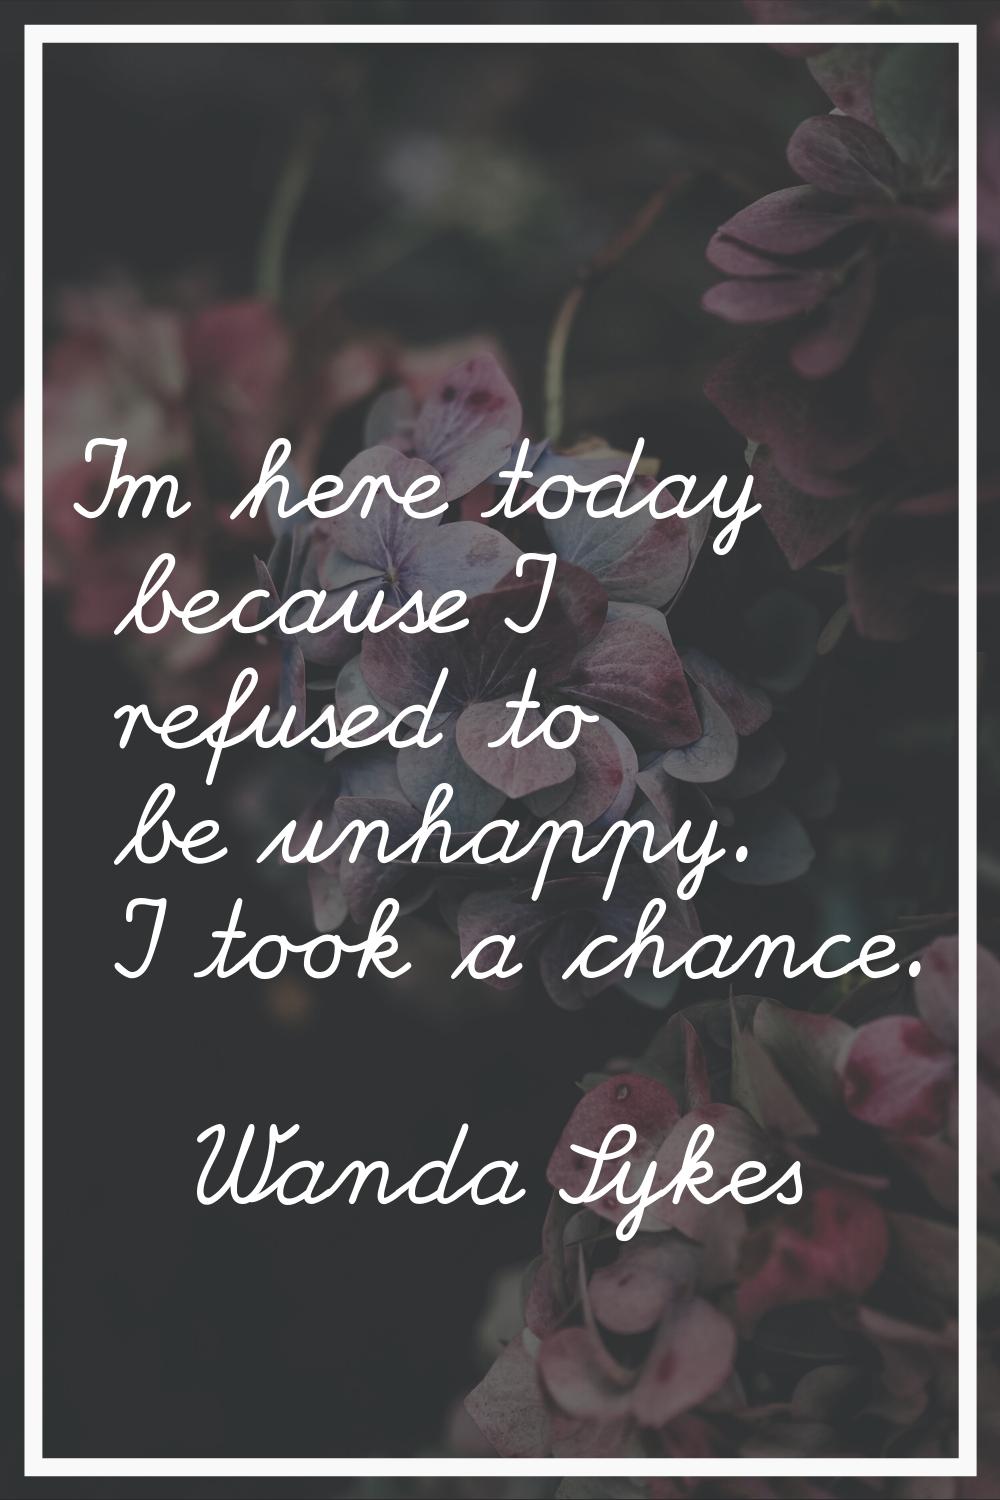 I'm here today because I refused to be unhappy. I took a chance.